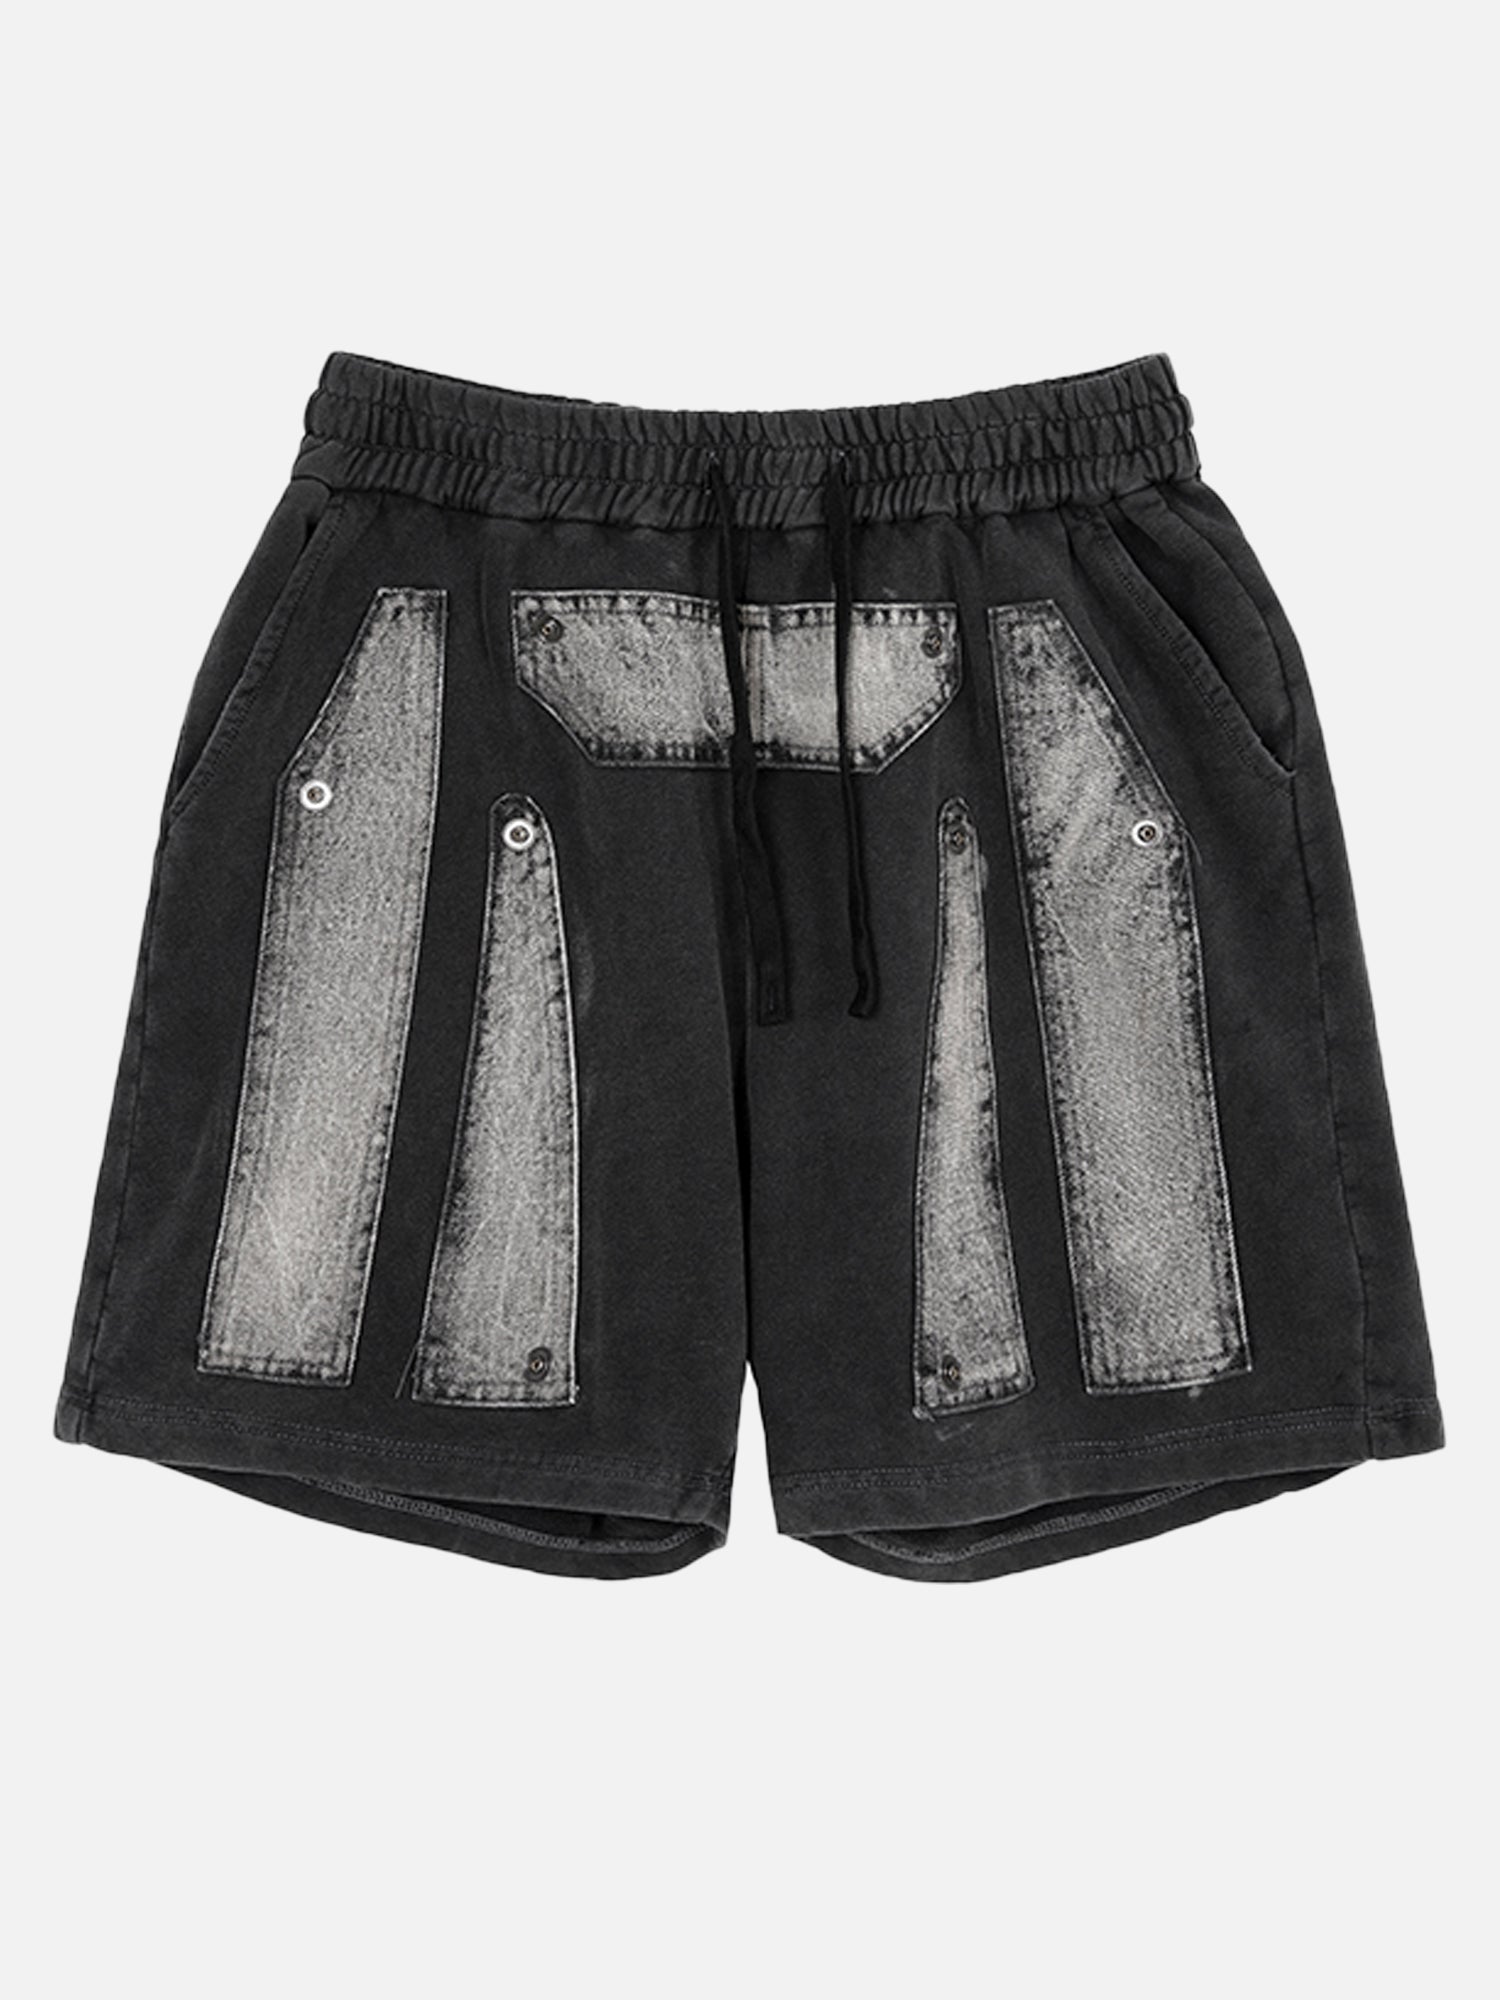 American Trendy Hip-hop Washed Patchwork Shorts